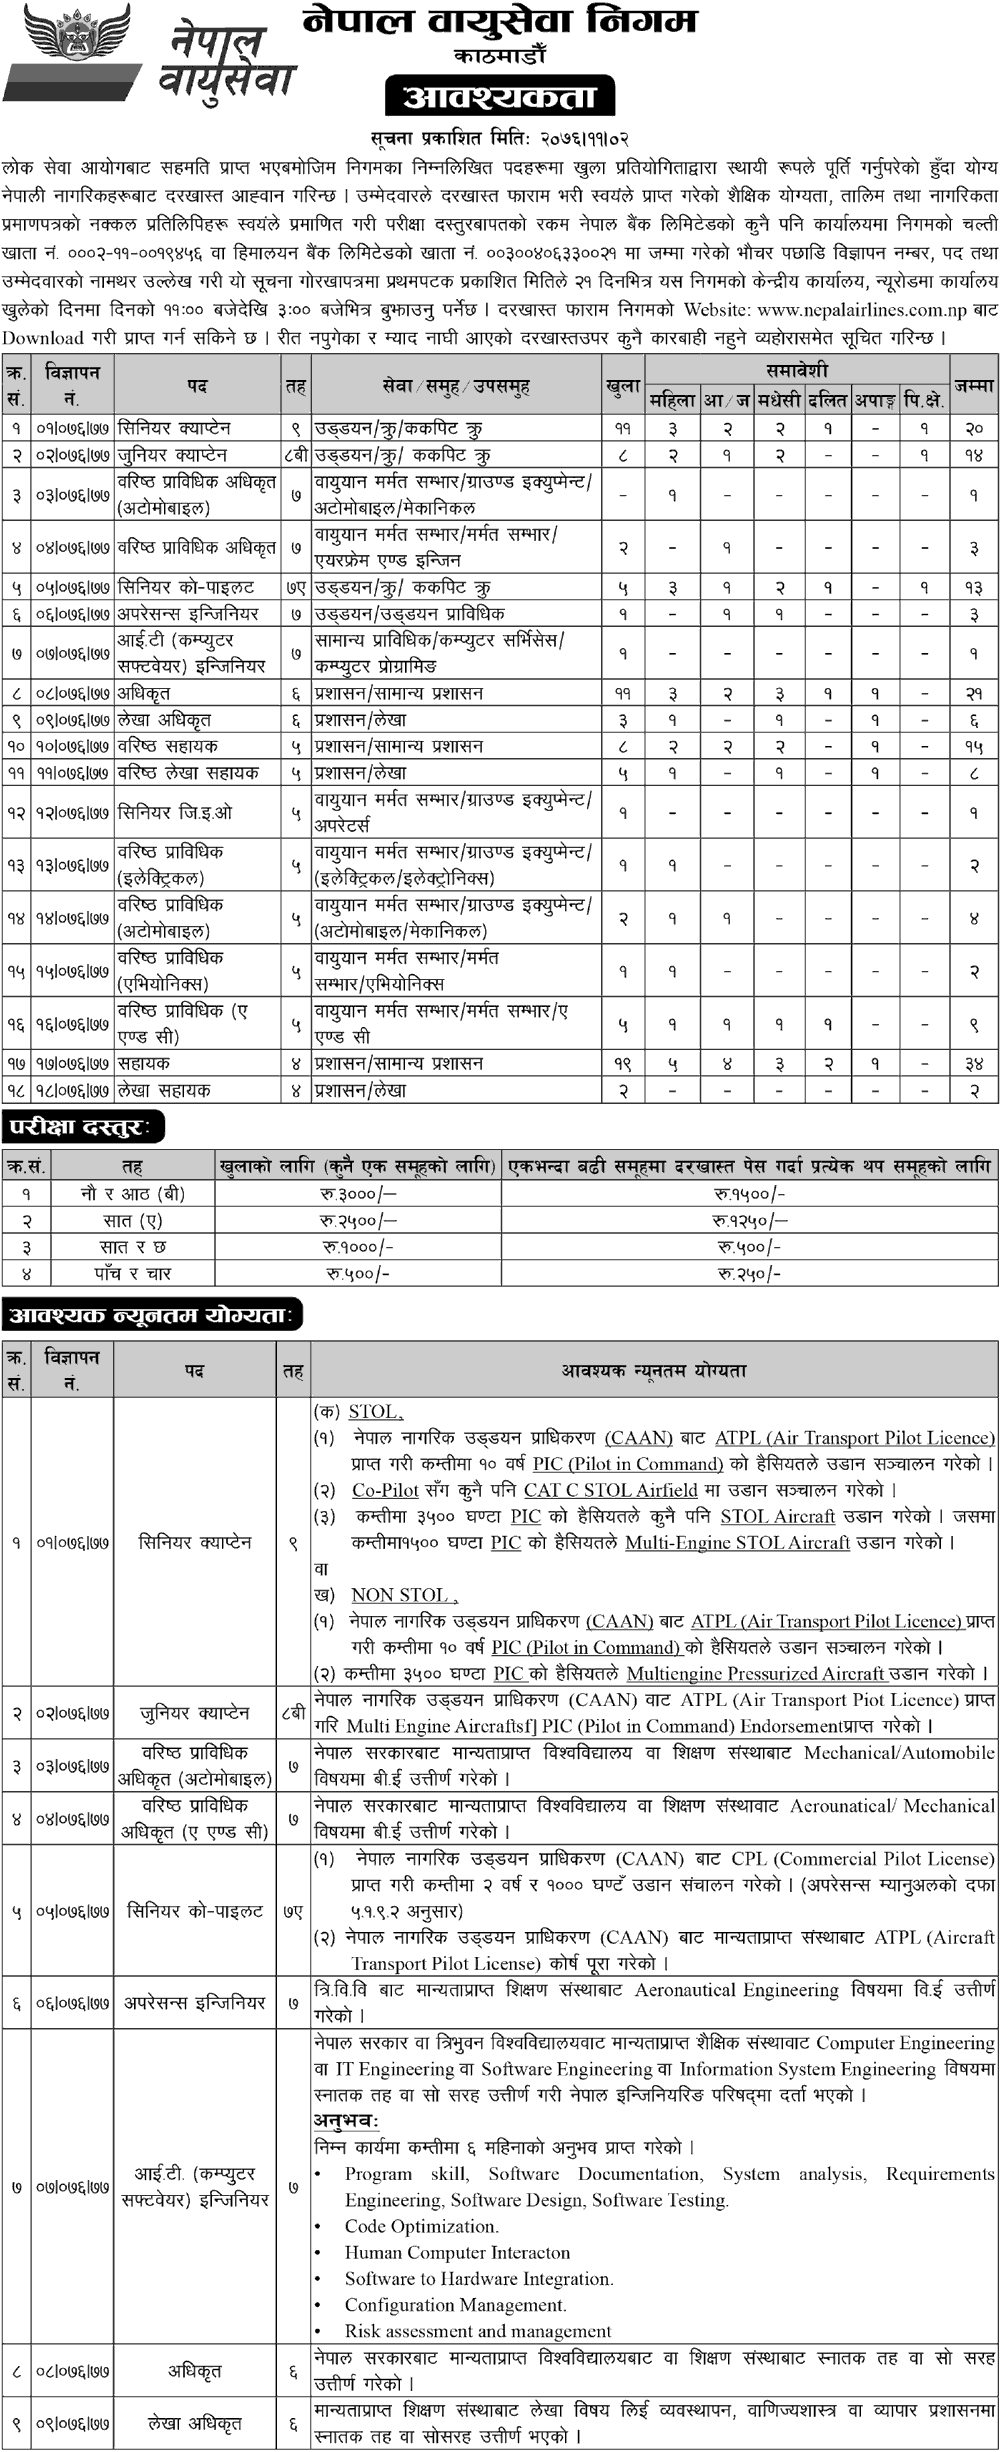 Nepal Airlines Corporation Vacancy Notice